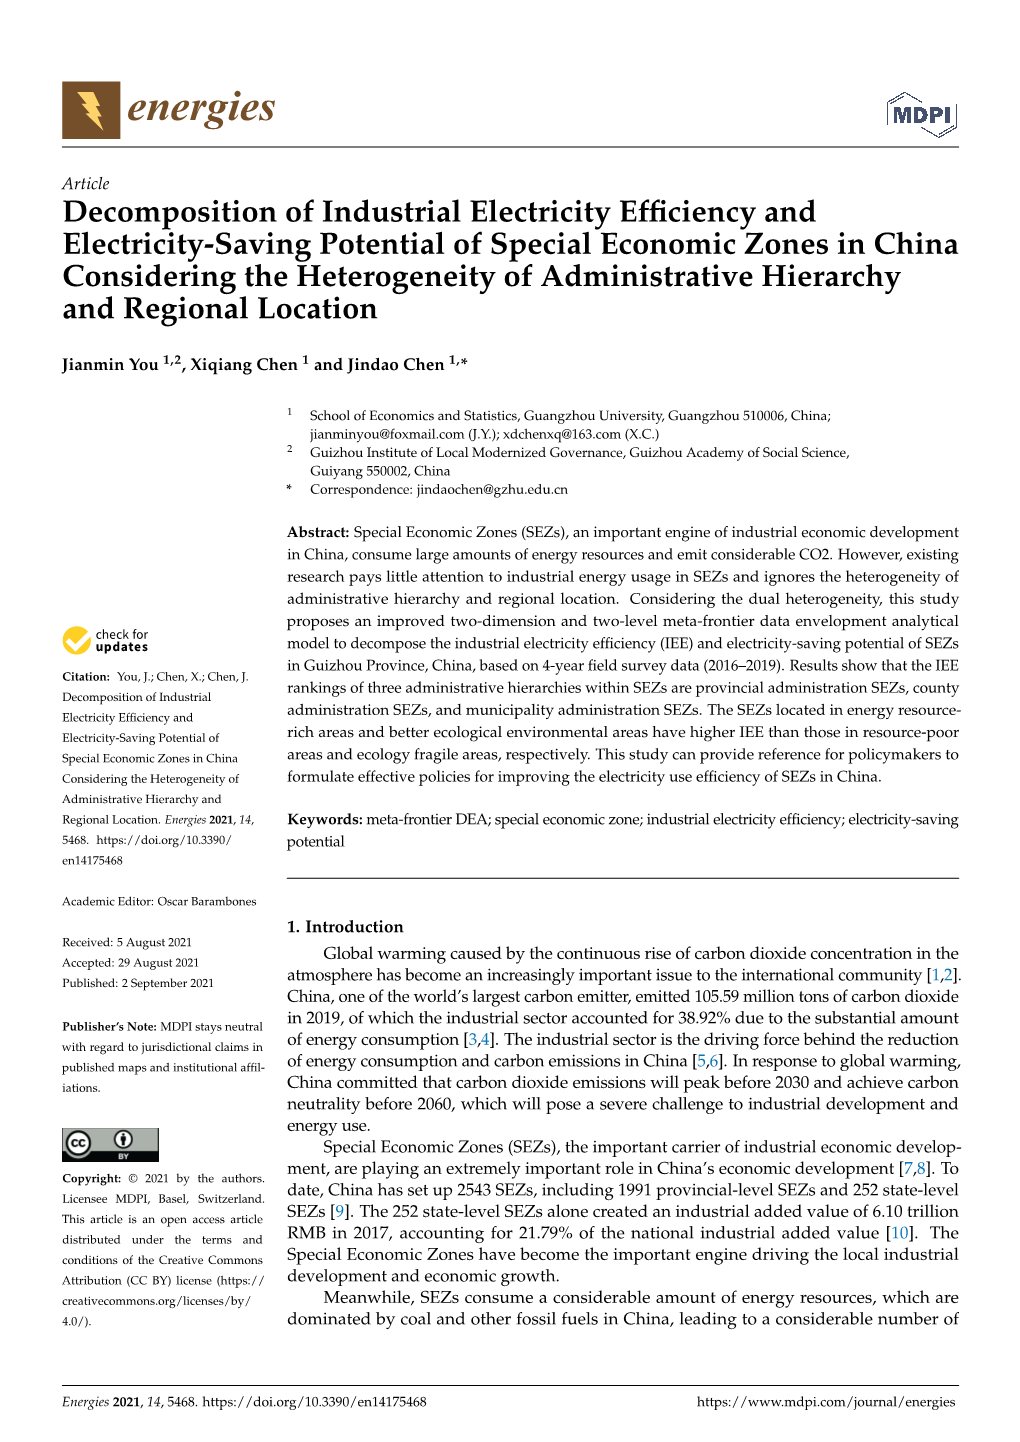 Decomposition of Industrial Electricity Efficiency and Electricity-Saving Potential of Special Economic Zones in China Consideri